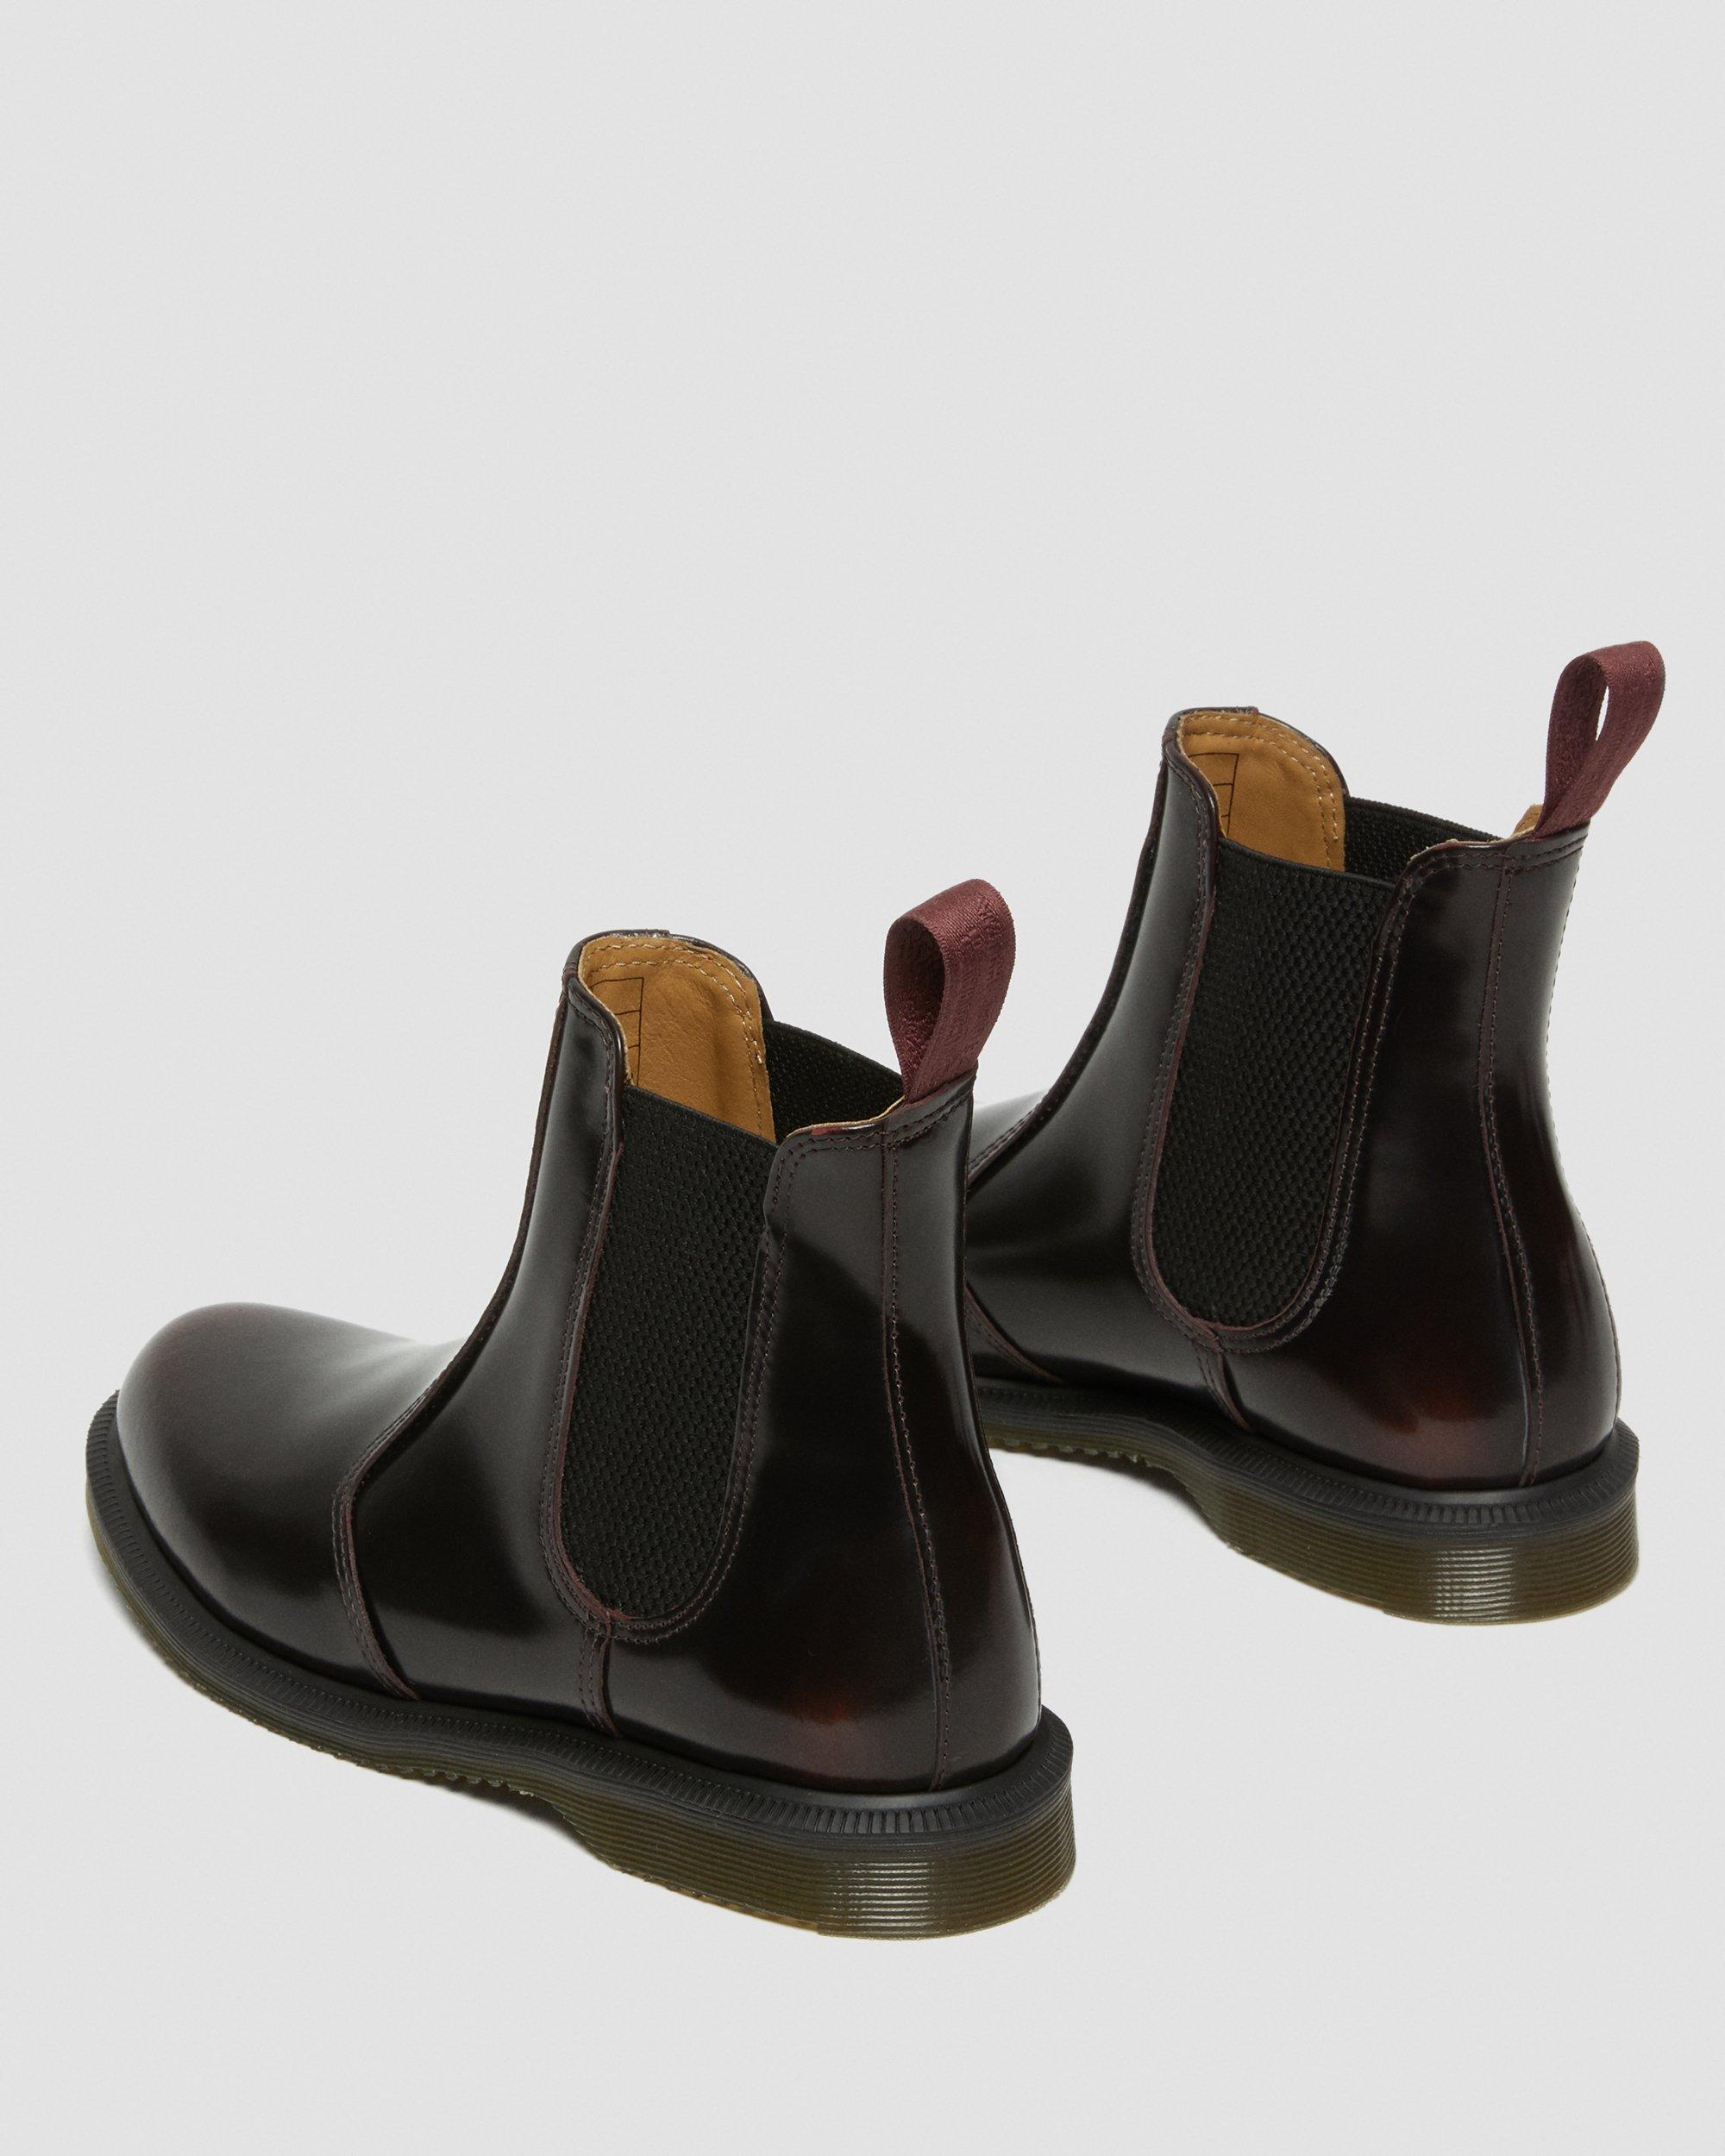 ARCADIA LEATHER CHELSEA BOOTS | Dr. Martens